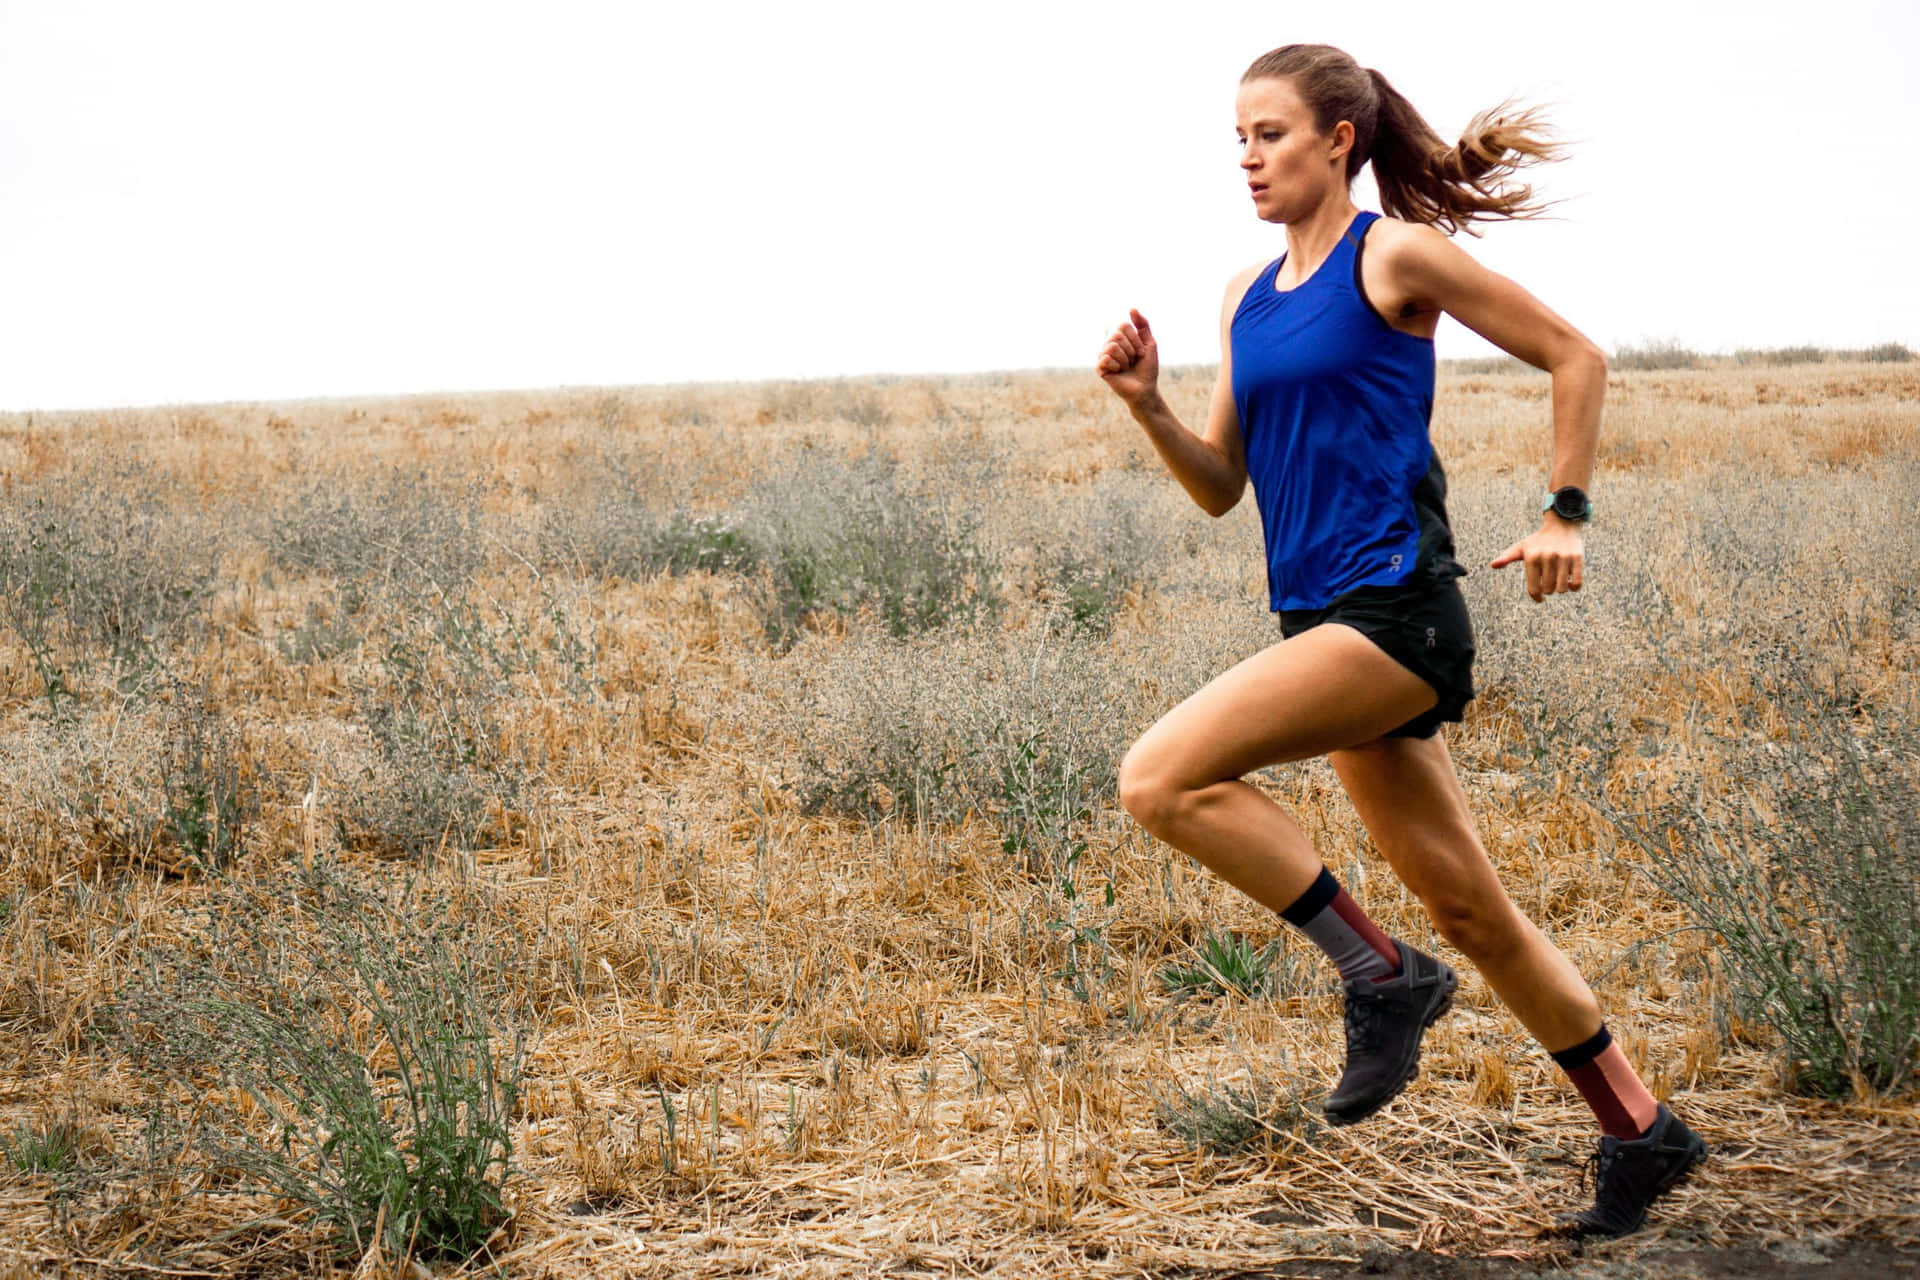 Break through your limits with running!